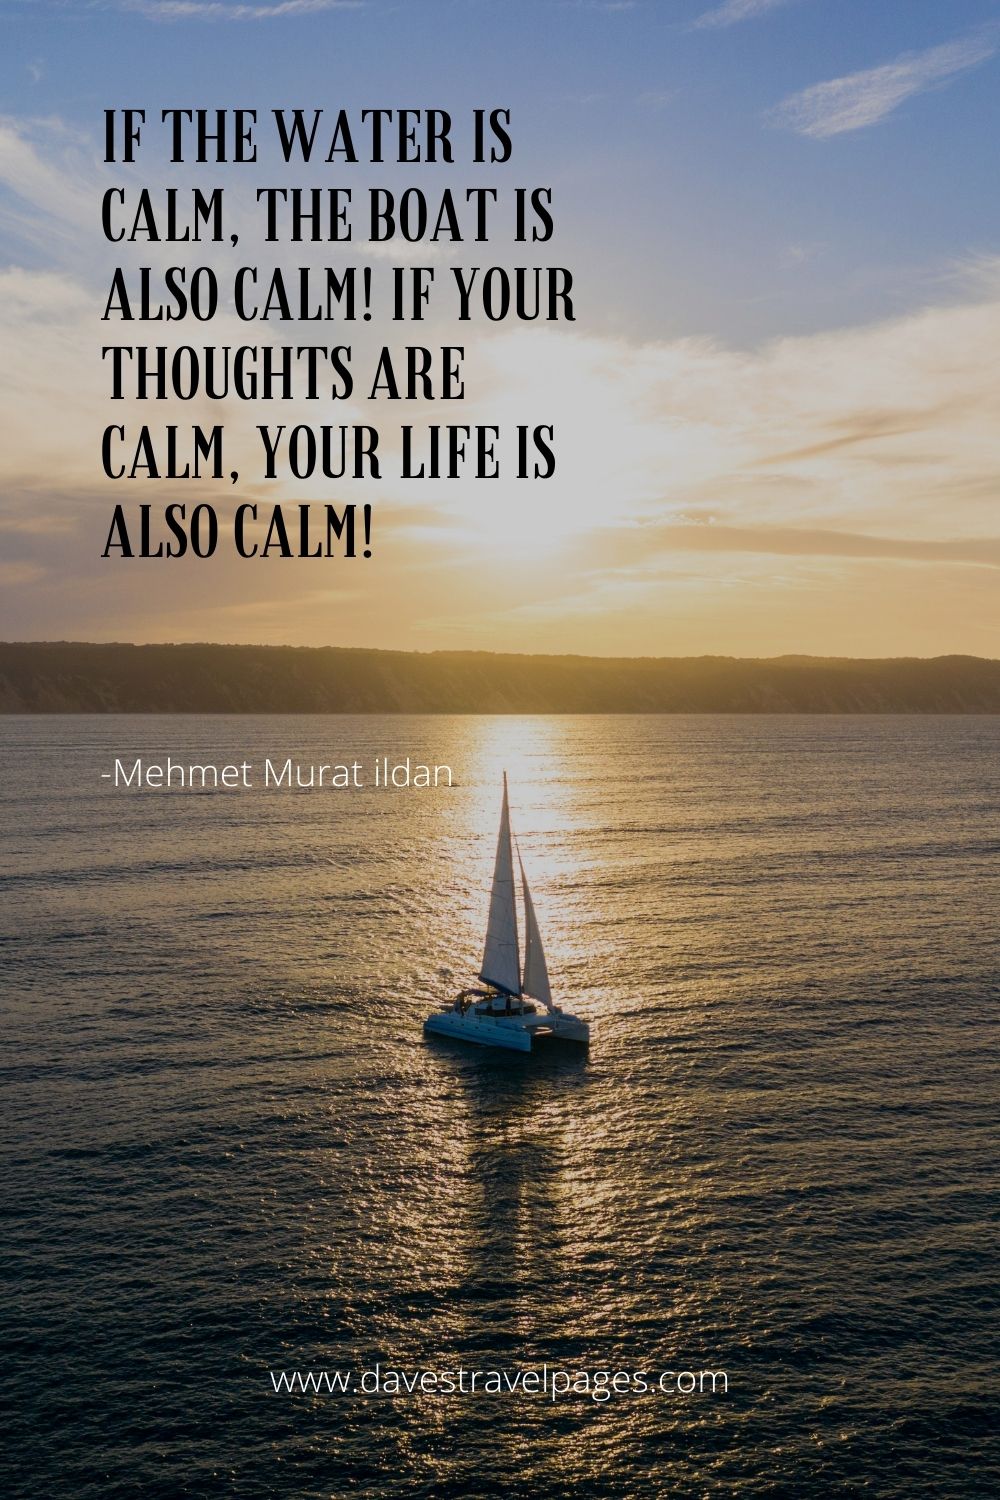 Boat Quote: If the water is calm, the boat is also calm! If your thoughts are calm, your life is also calm!